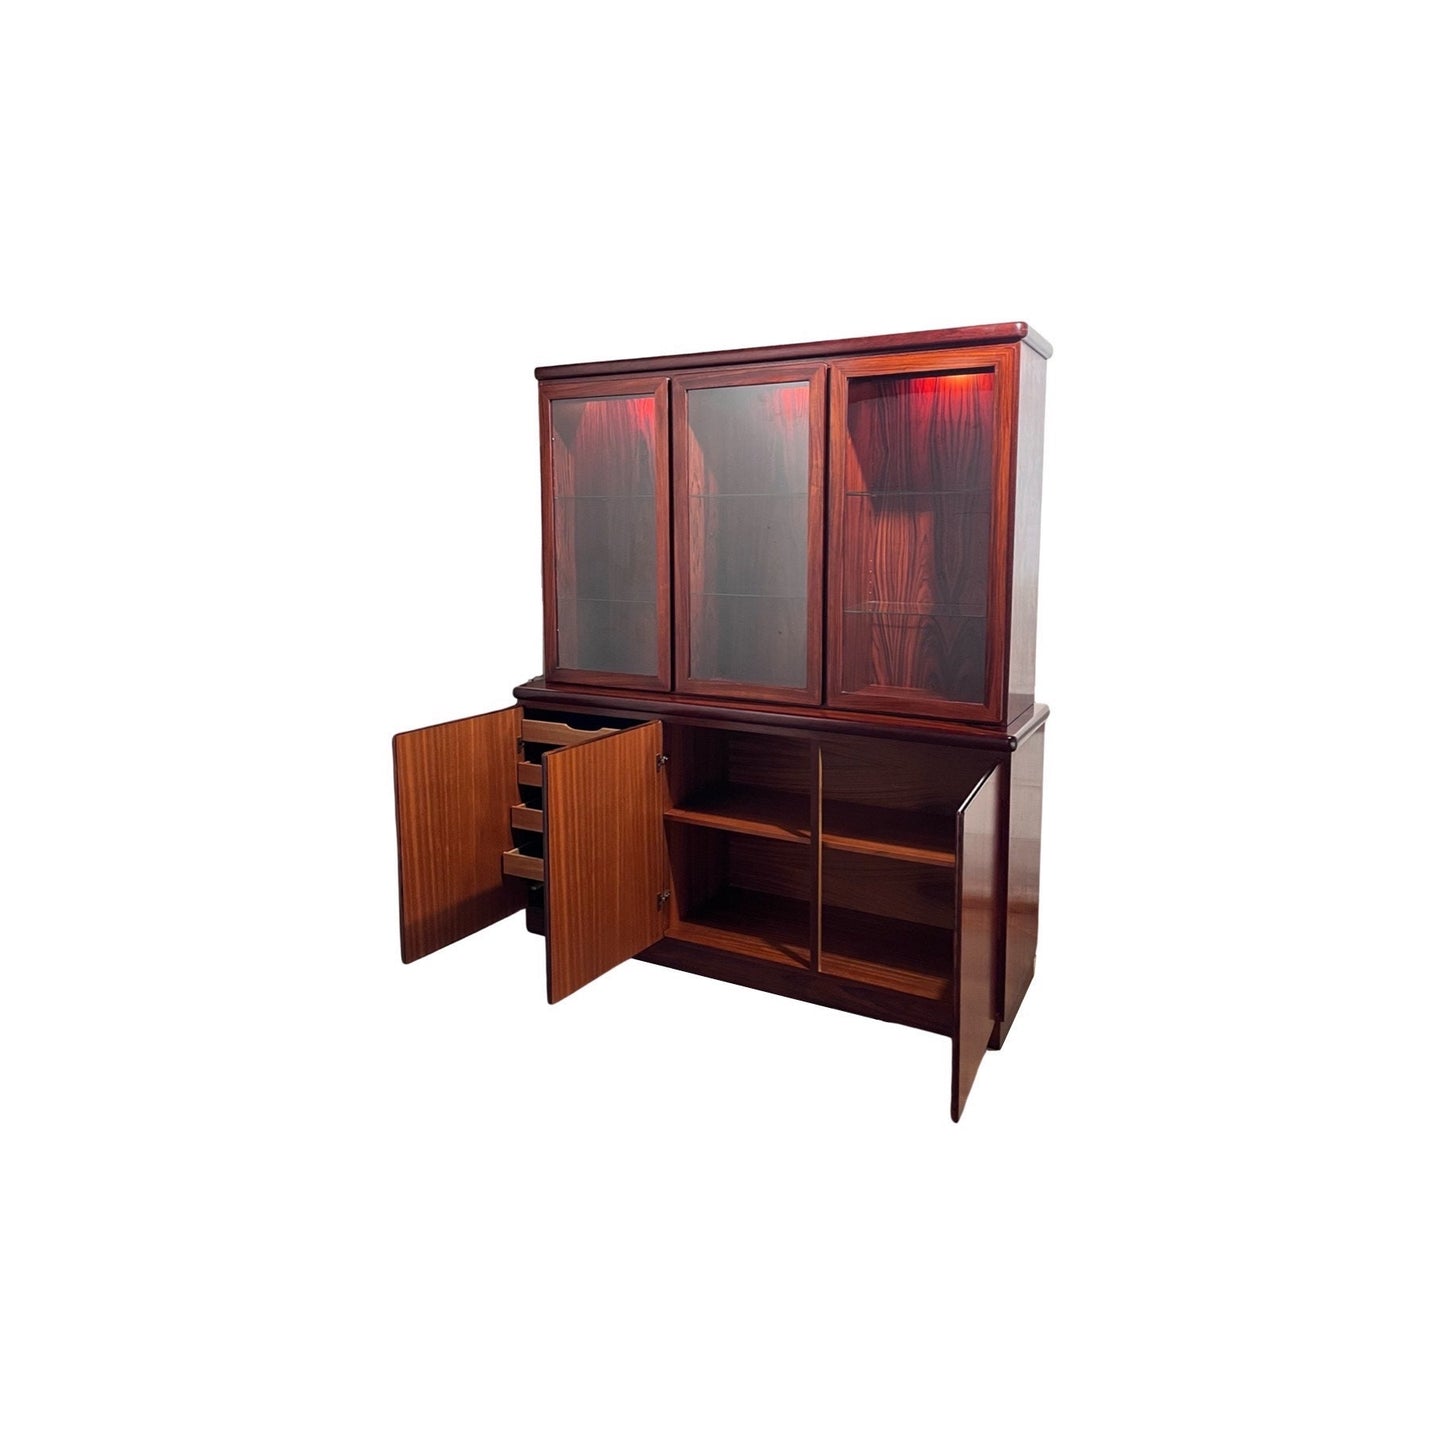 Bottom Cabinet with Wooden Doors and Adjustable Shelf - China Display Cabinet by Rasmus made in Denmark from Rosewood